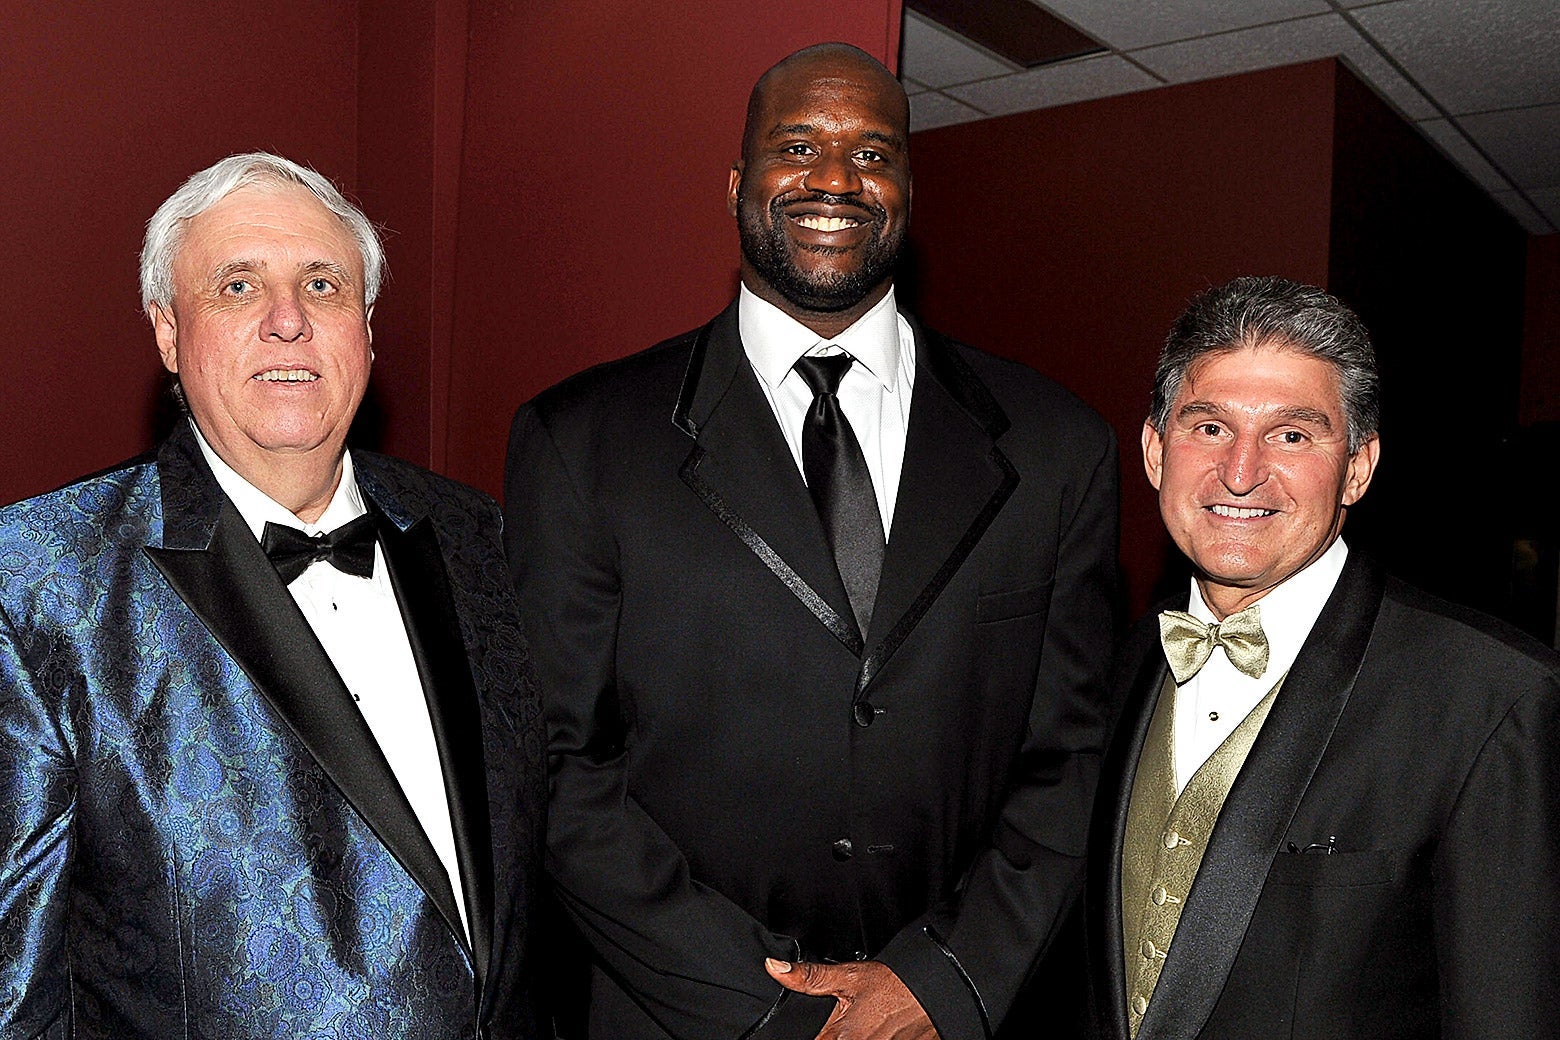 From L-R: Jim Justice, wearing a blue brocade suit jacket, Shaquille O'Neal wearing a black suit and tie, and Joe Manchin wearing a three-piece suit with a gold vest and bow tie.